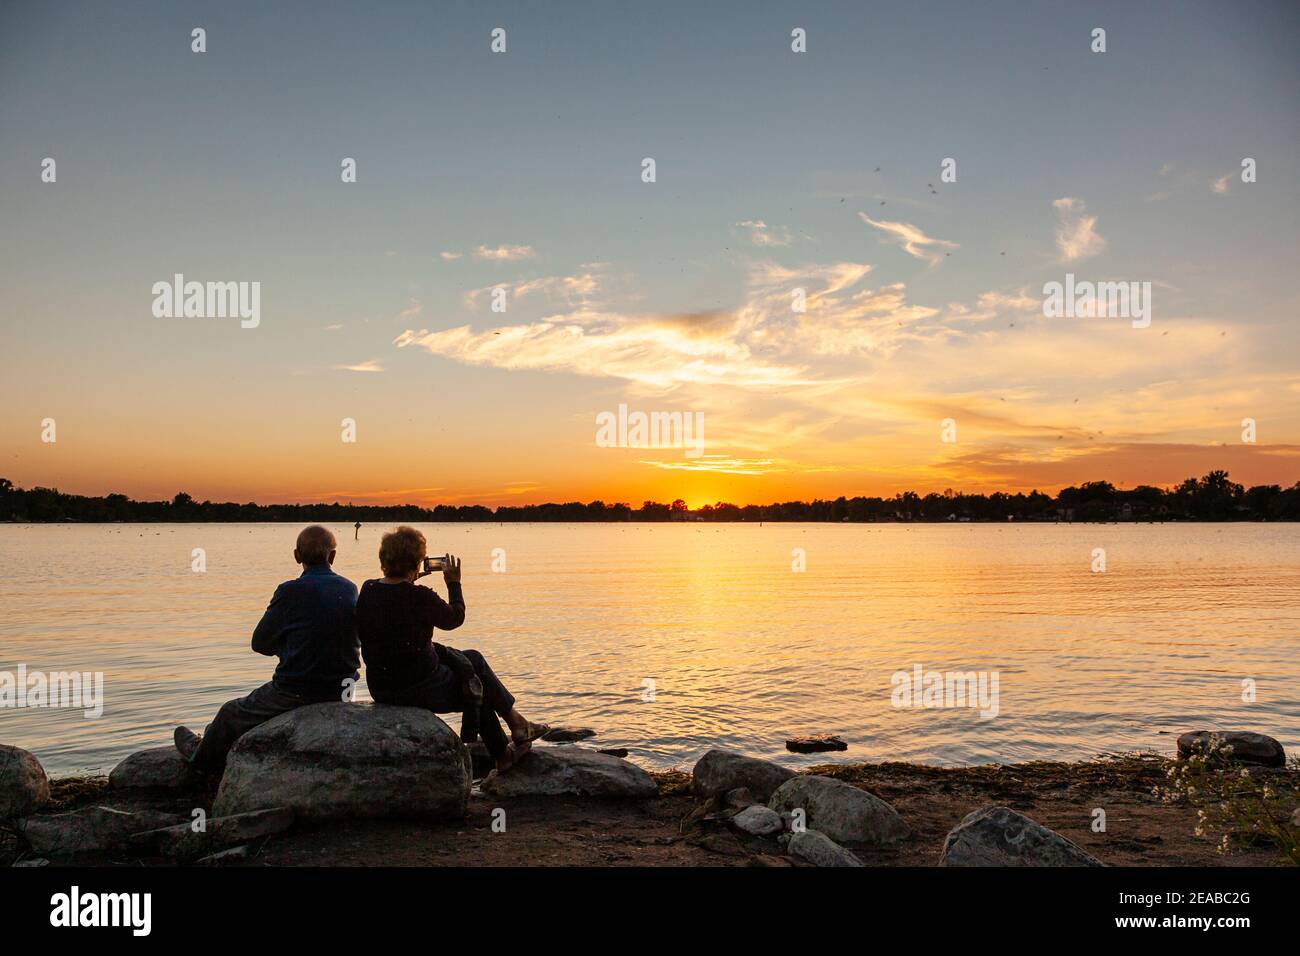 Senior couple silhouetted against a gorgeous sunset on a lake. Stock Photo